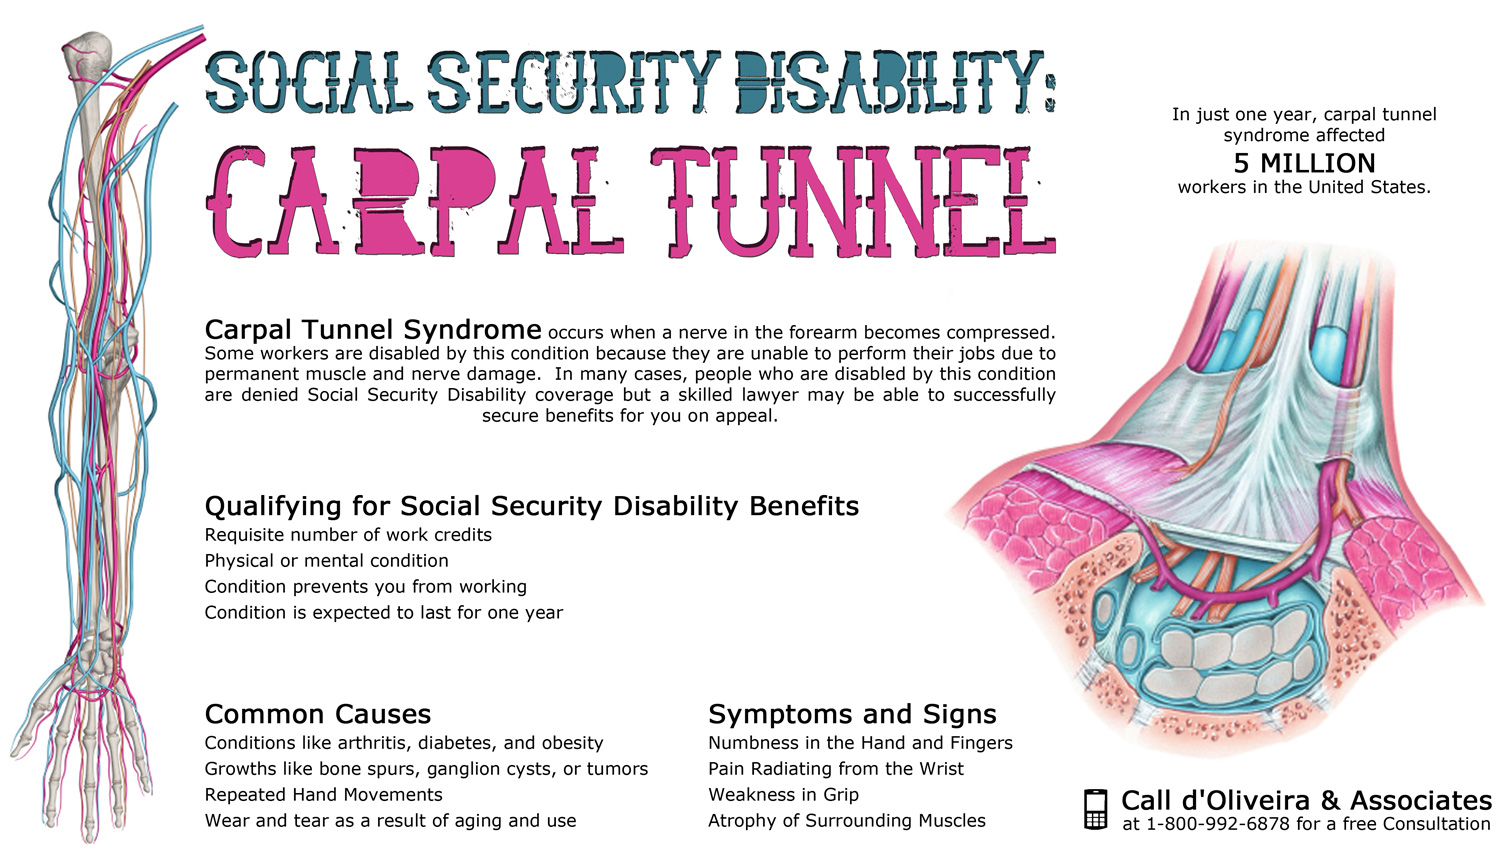 va disability percentages for carpal tunnel